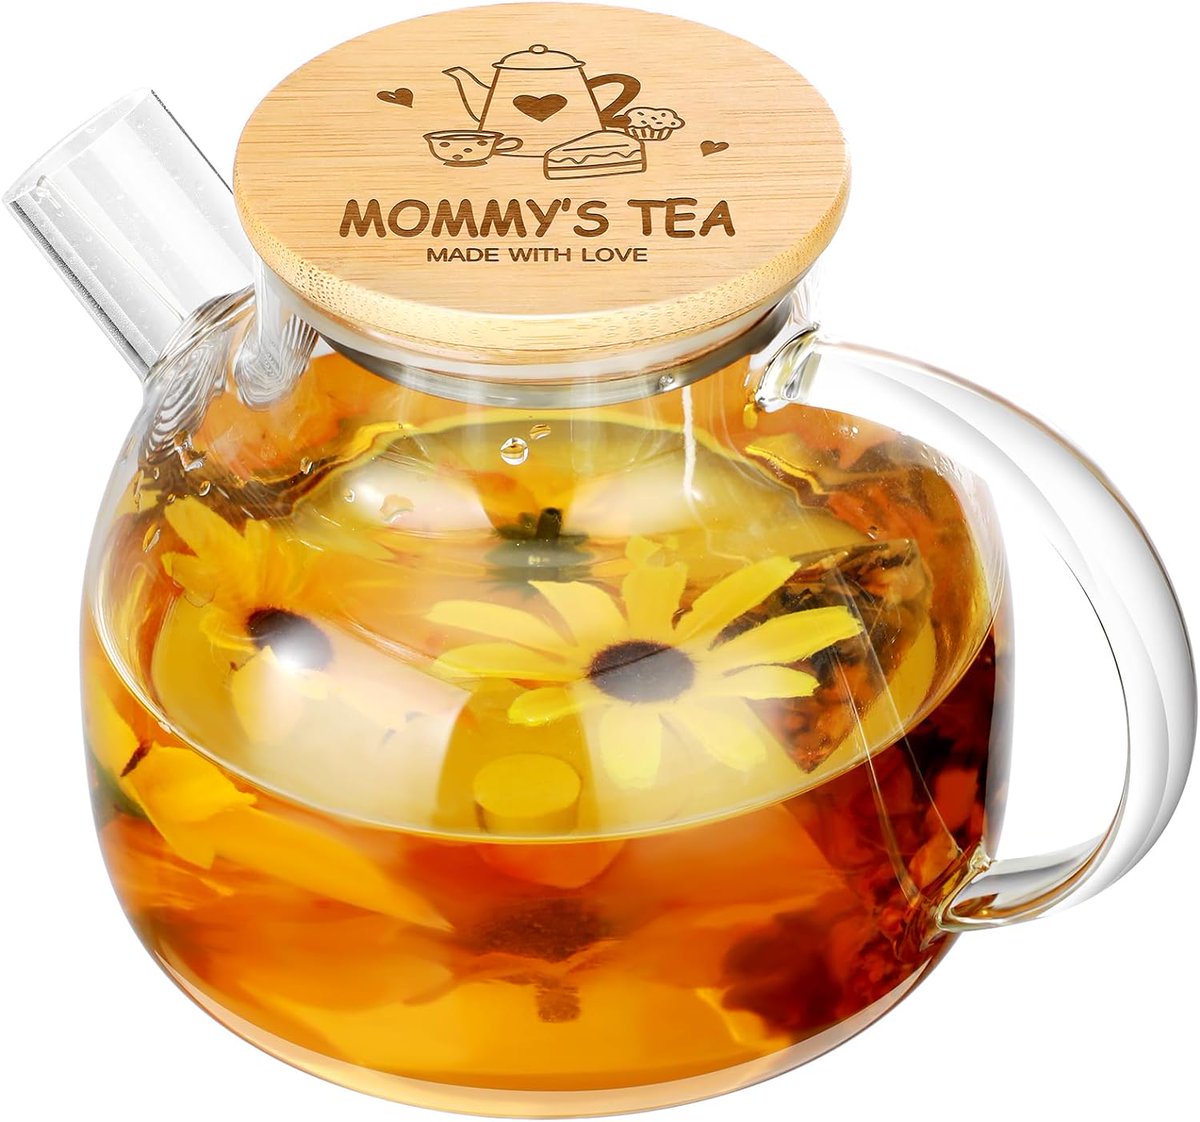 MORE DEALS – ALL CATEGORIES: May 10, 2024
Featured: Mommy’s Tea Glass Teapot
dailydealbusters.com/more-deals-all…
💃🕺🕍🌯🌮🌺
#aff #cathyslink #dailydealbusters #DailyDeals